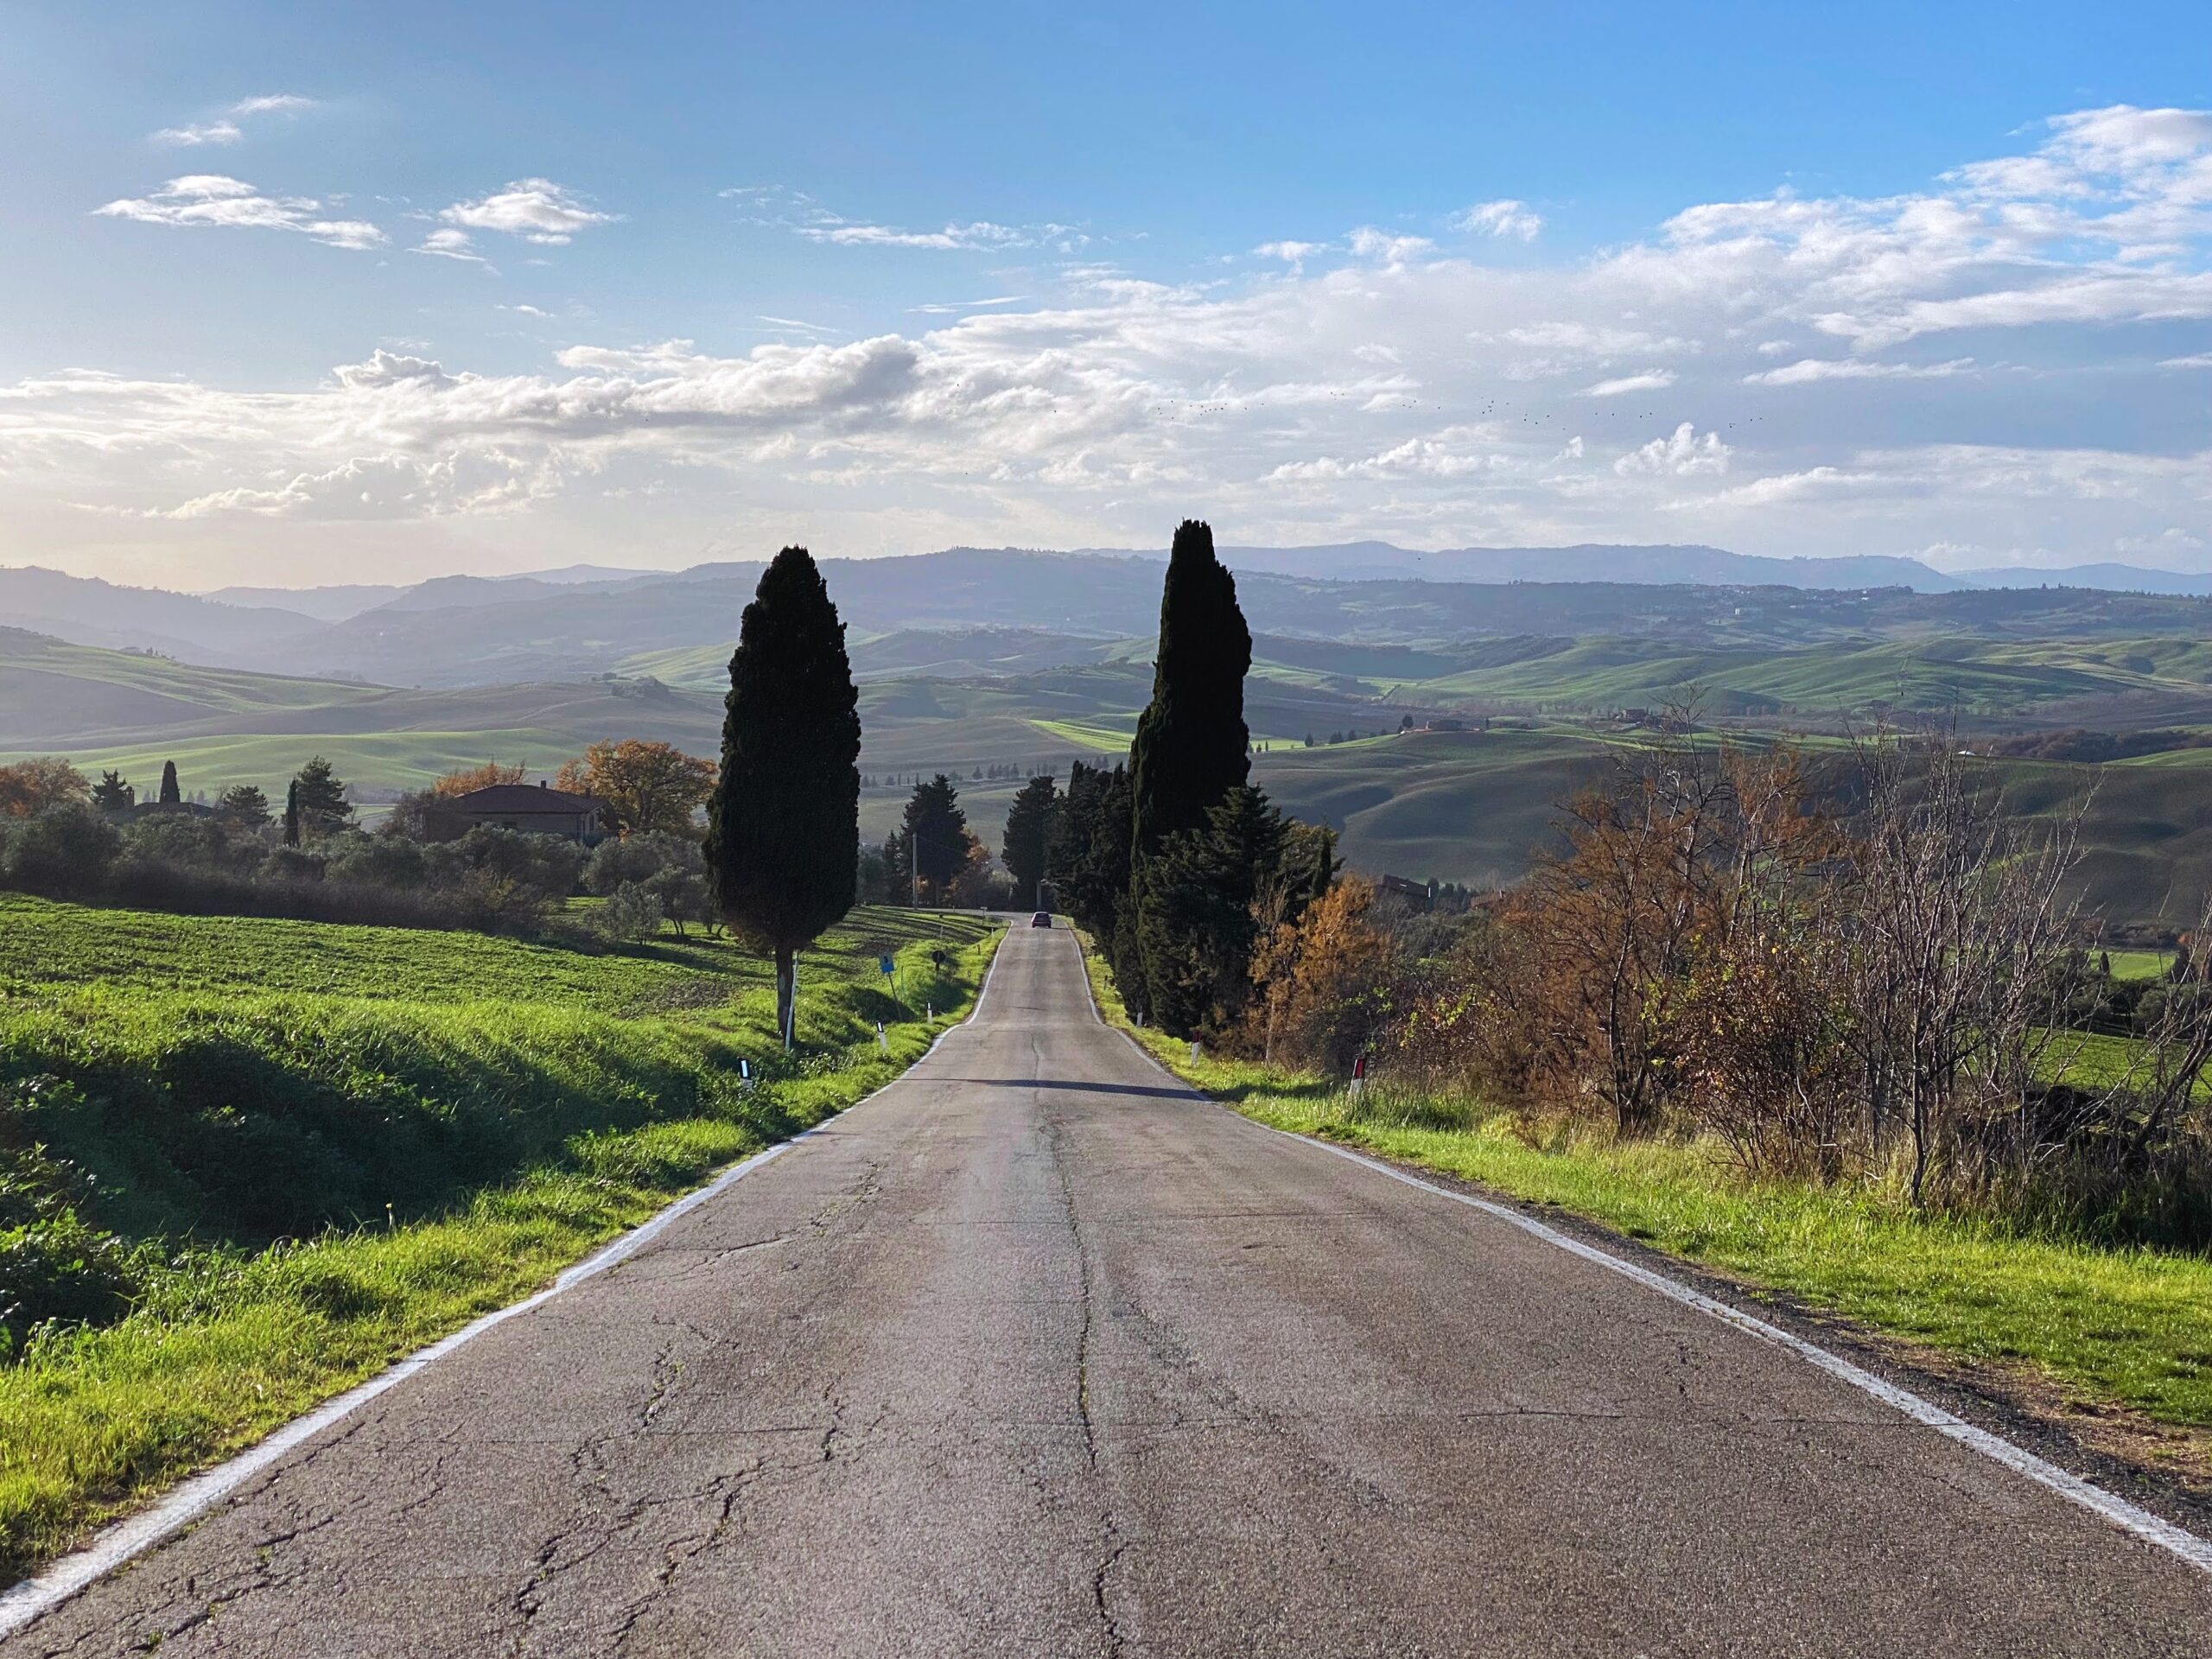 Cypress trees line on the sides of a road in the Val d'Orcia in Tuscany, Italy